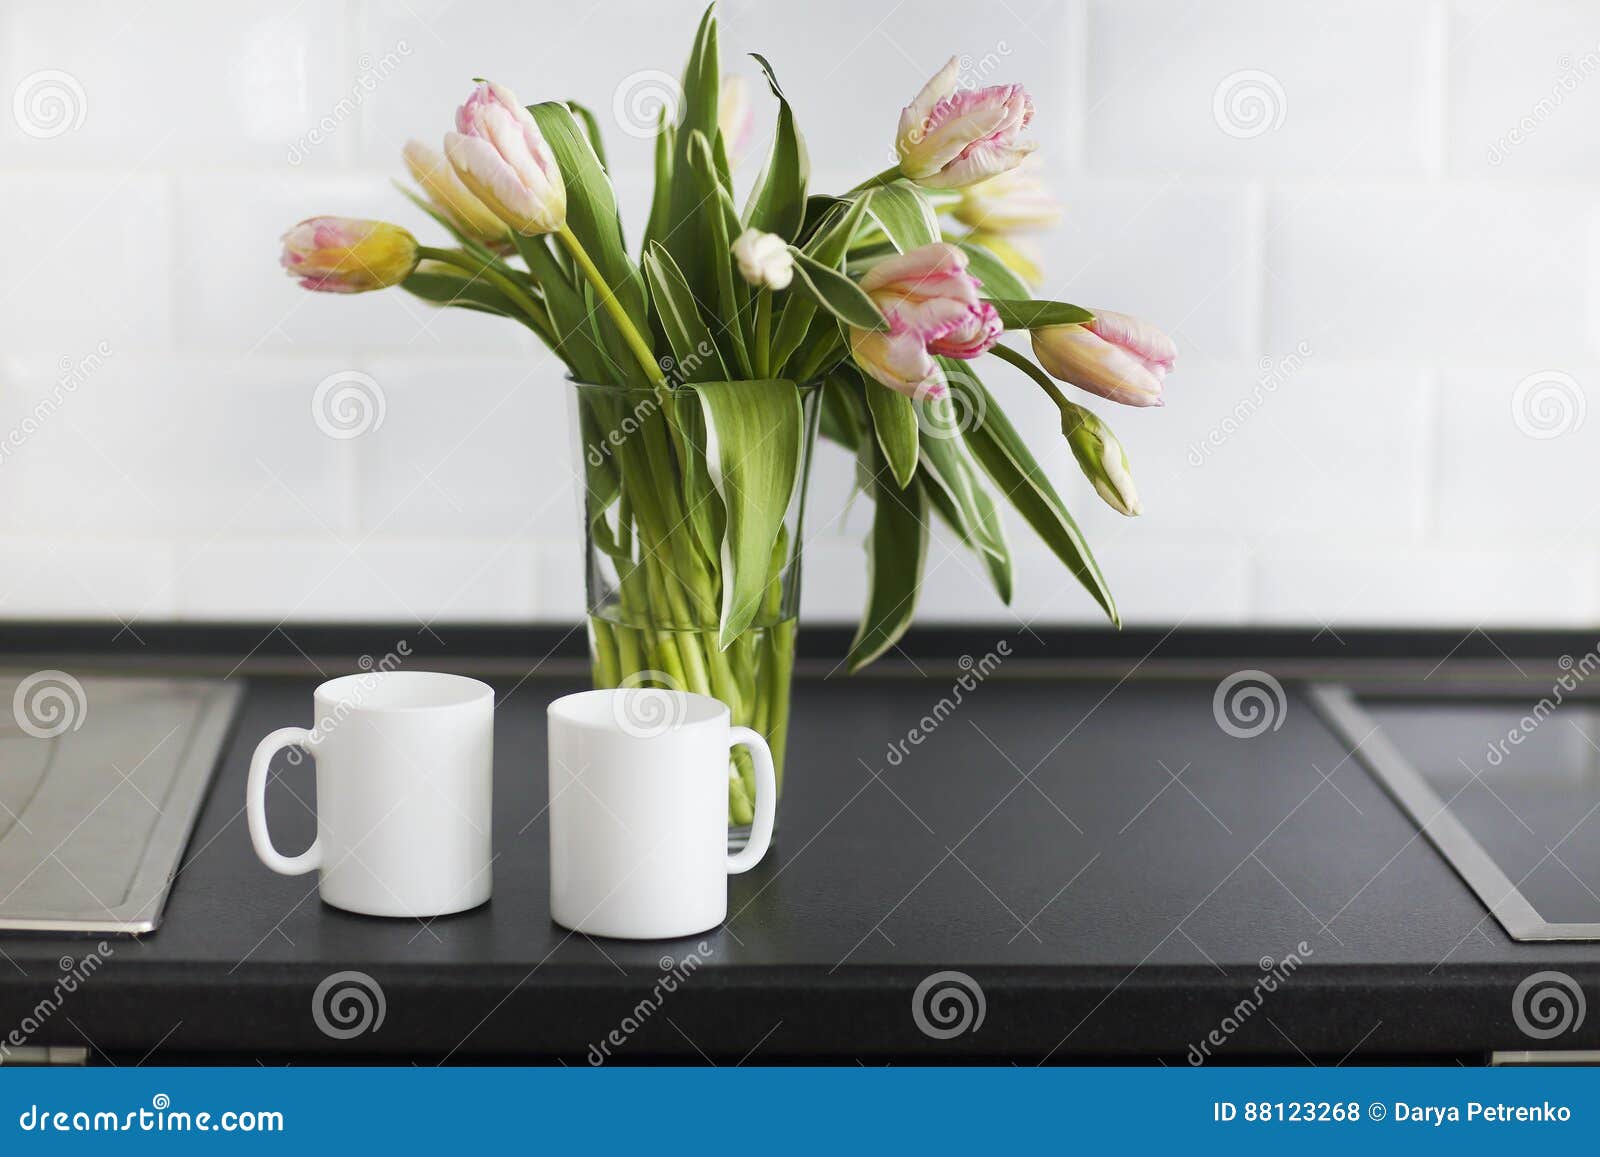 pink tulips bouquet in glass vase on the kitchen